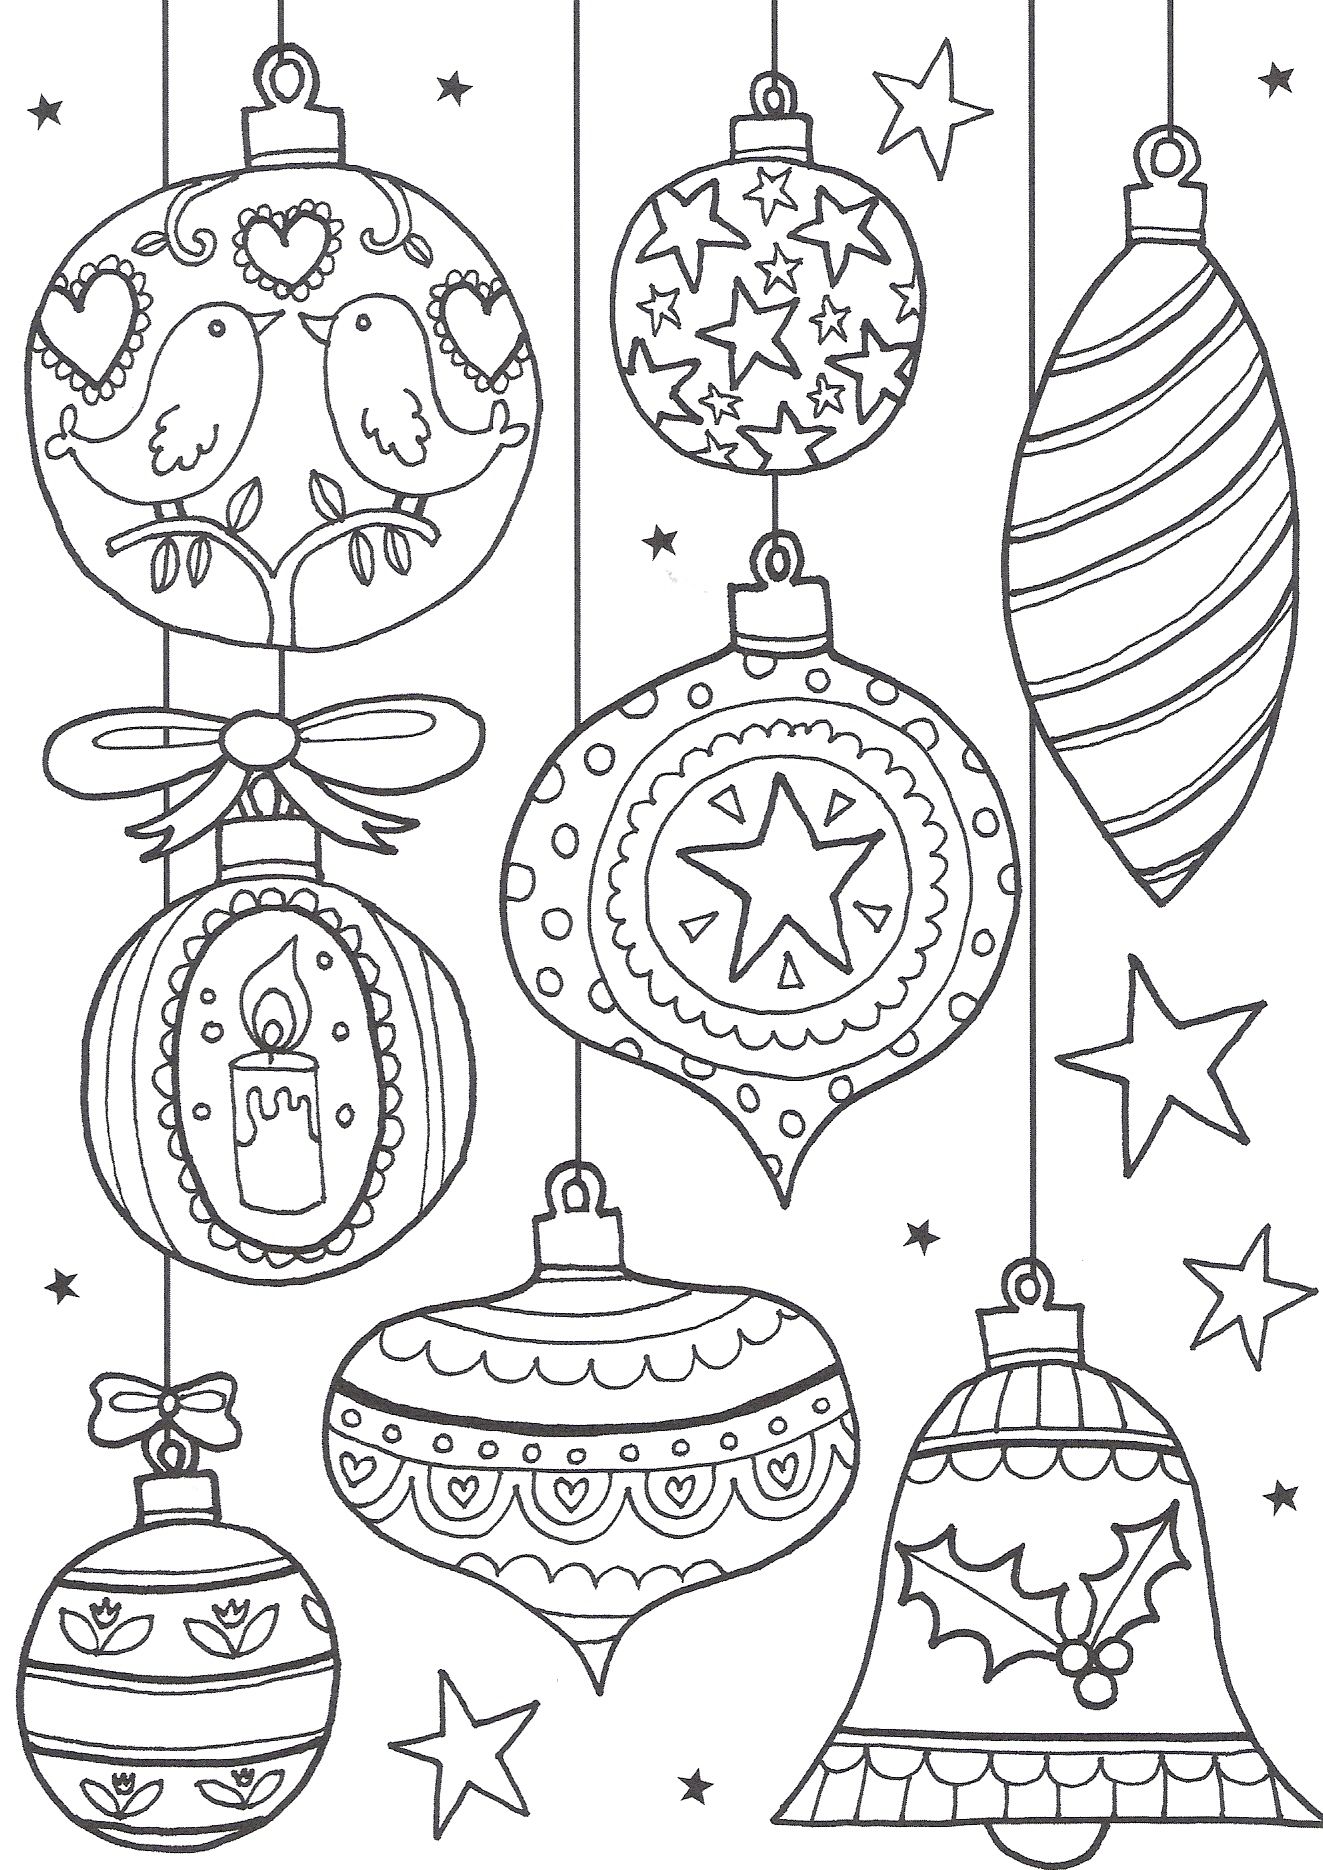 Free Coloring Pages | Adult ...